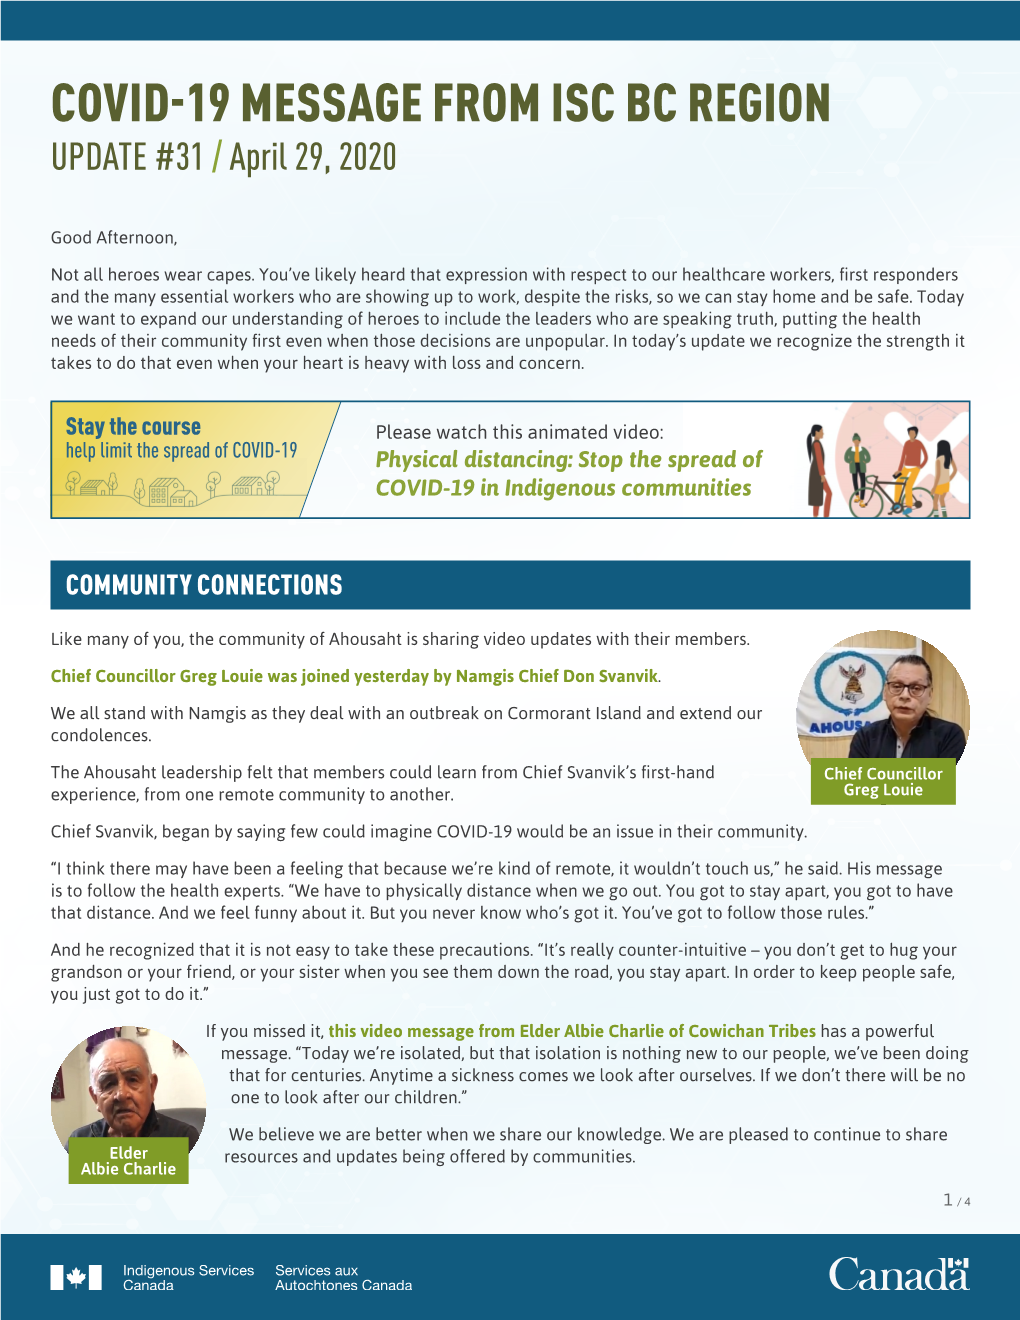 COVID-19 MESSAGE from ISC BC REGION UPDATE #31 / April 29, 2020